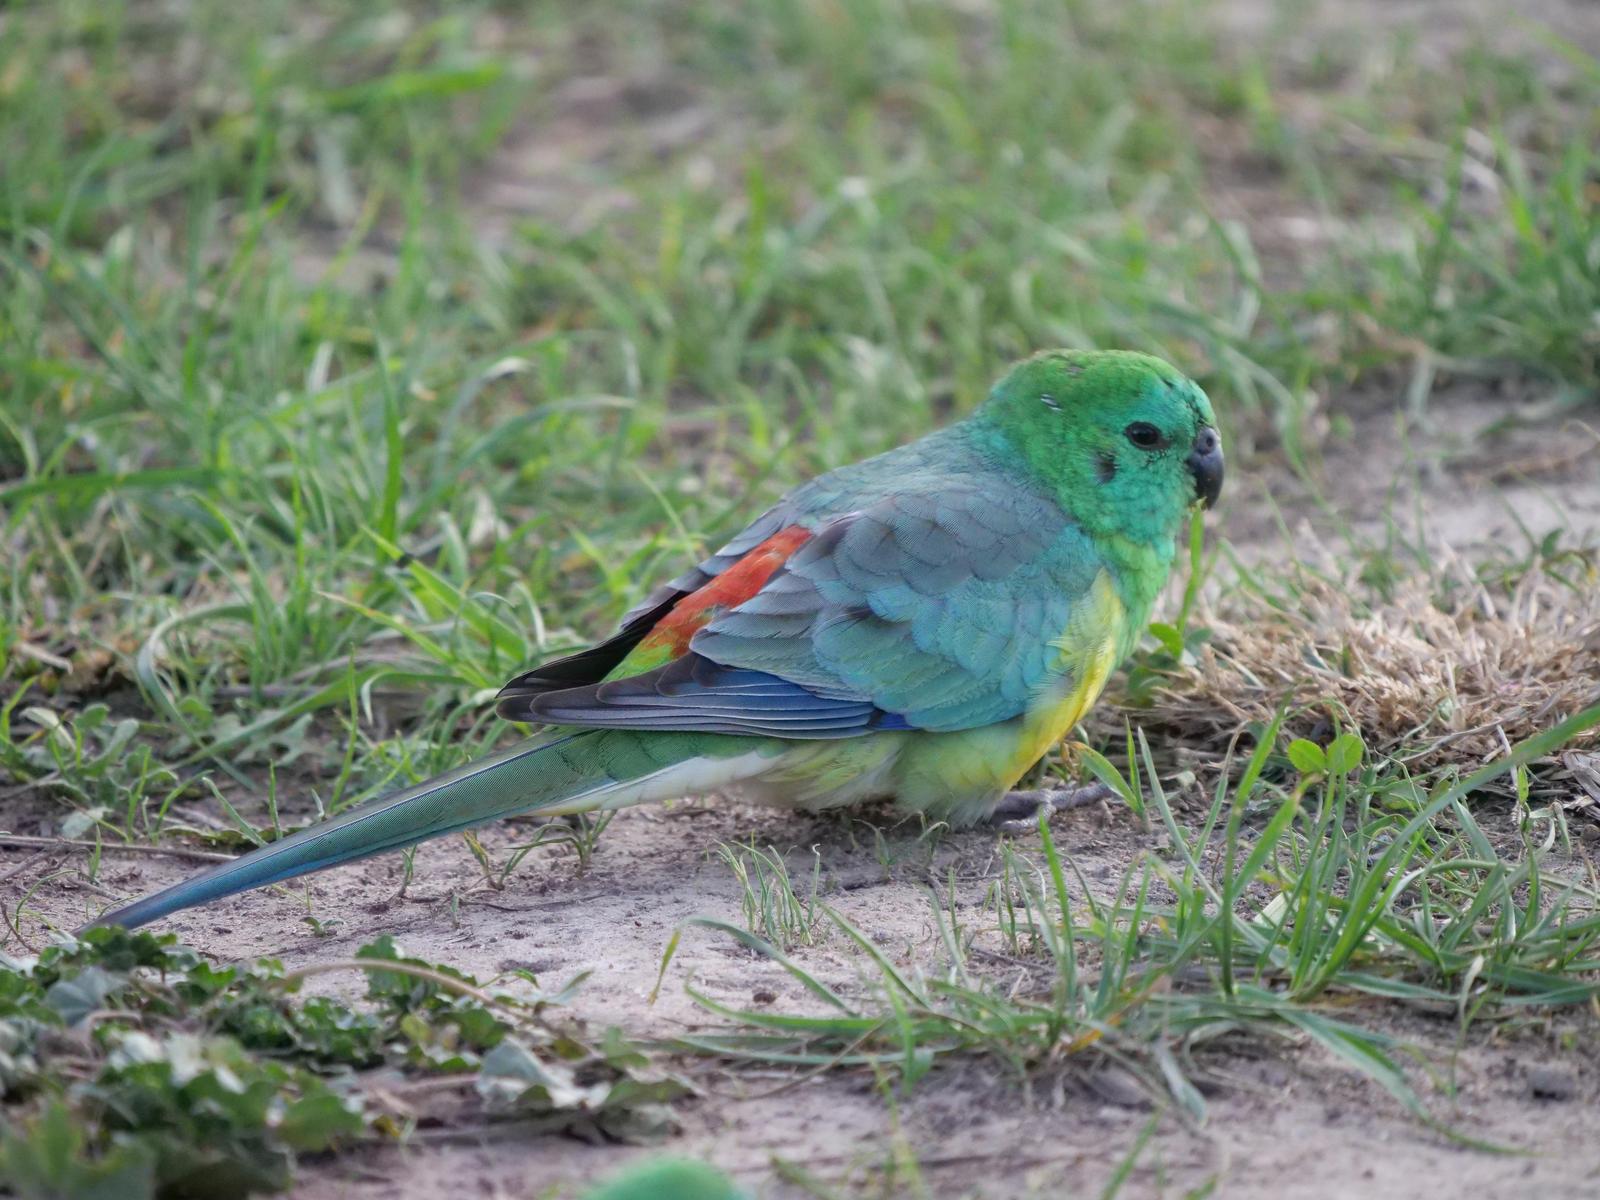 Red-rumped Parrot Photo by Peter Lowe